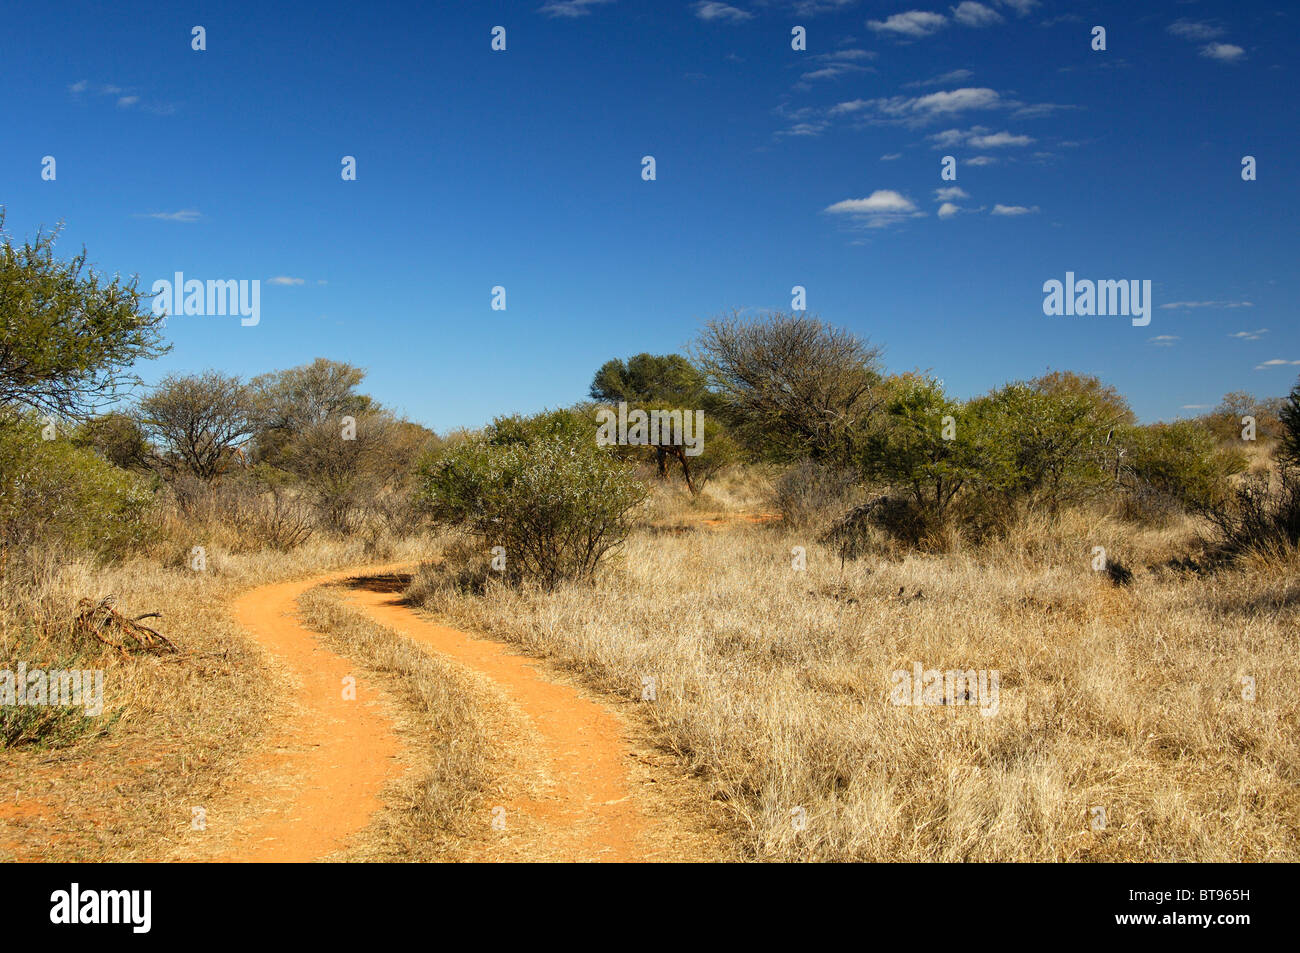 Red-brownish dirt road on Laterite soil crossing an African Acacia savanna landscape in the Madikwe Game Reserve, South Africa Stock Photo